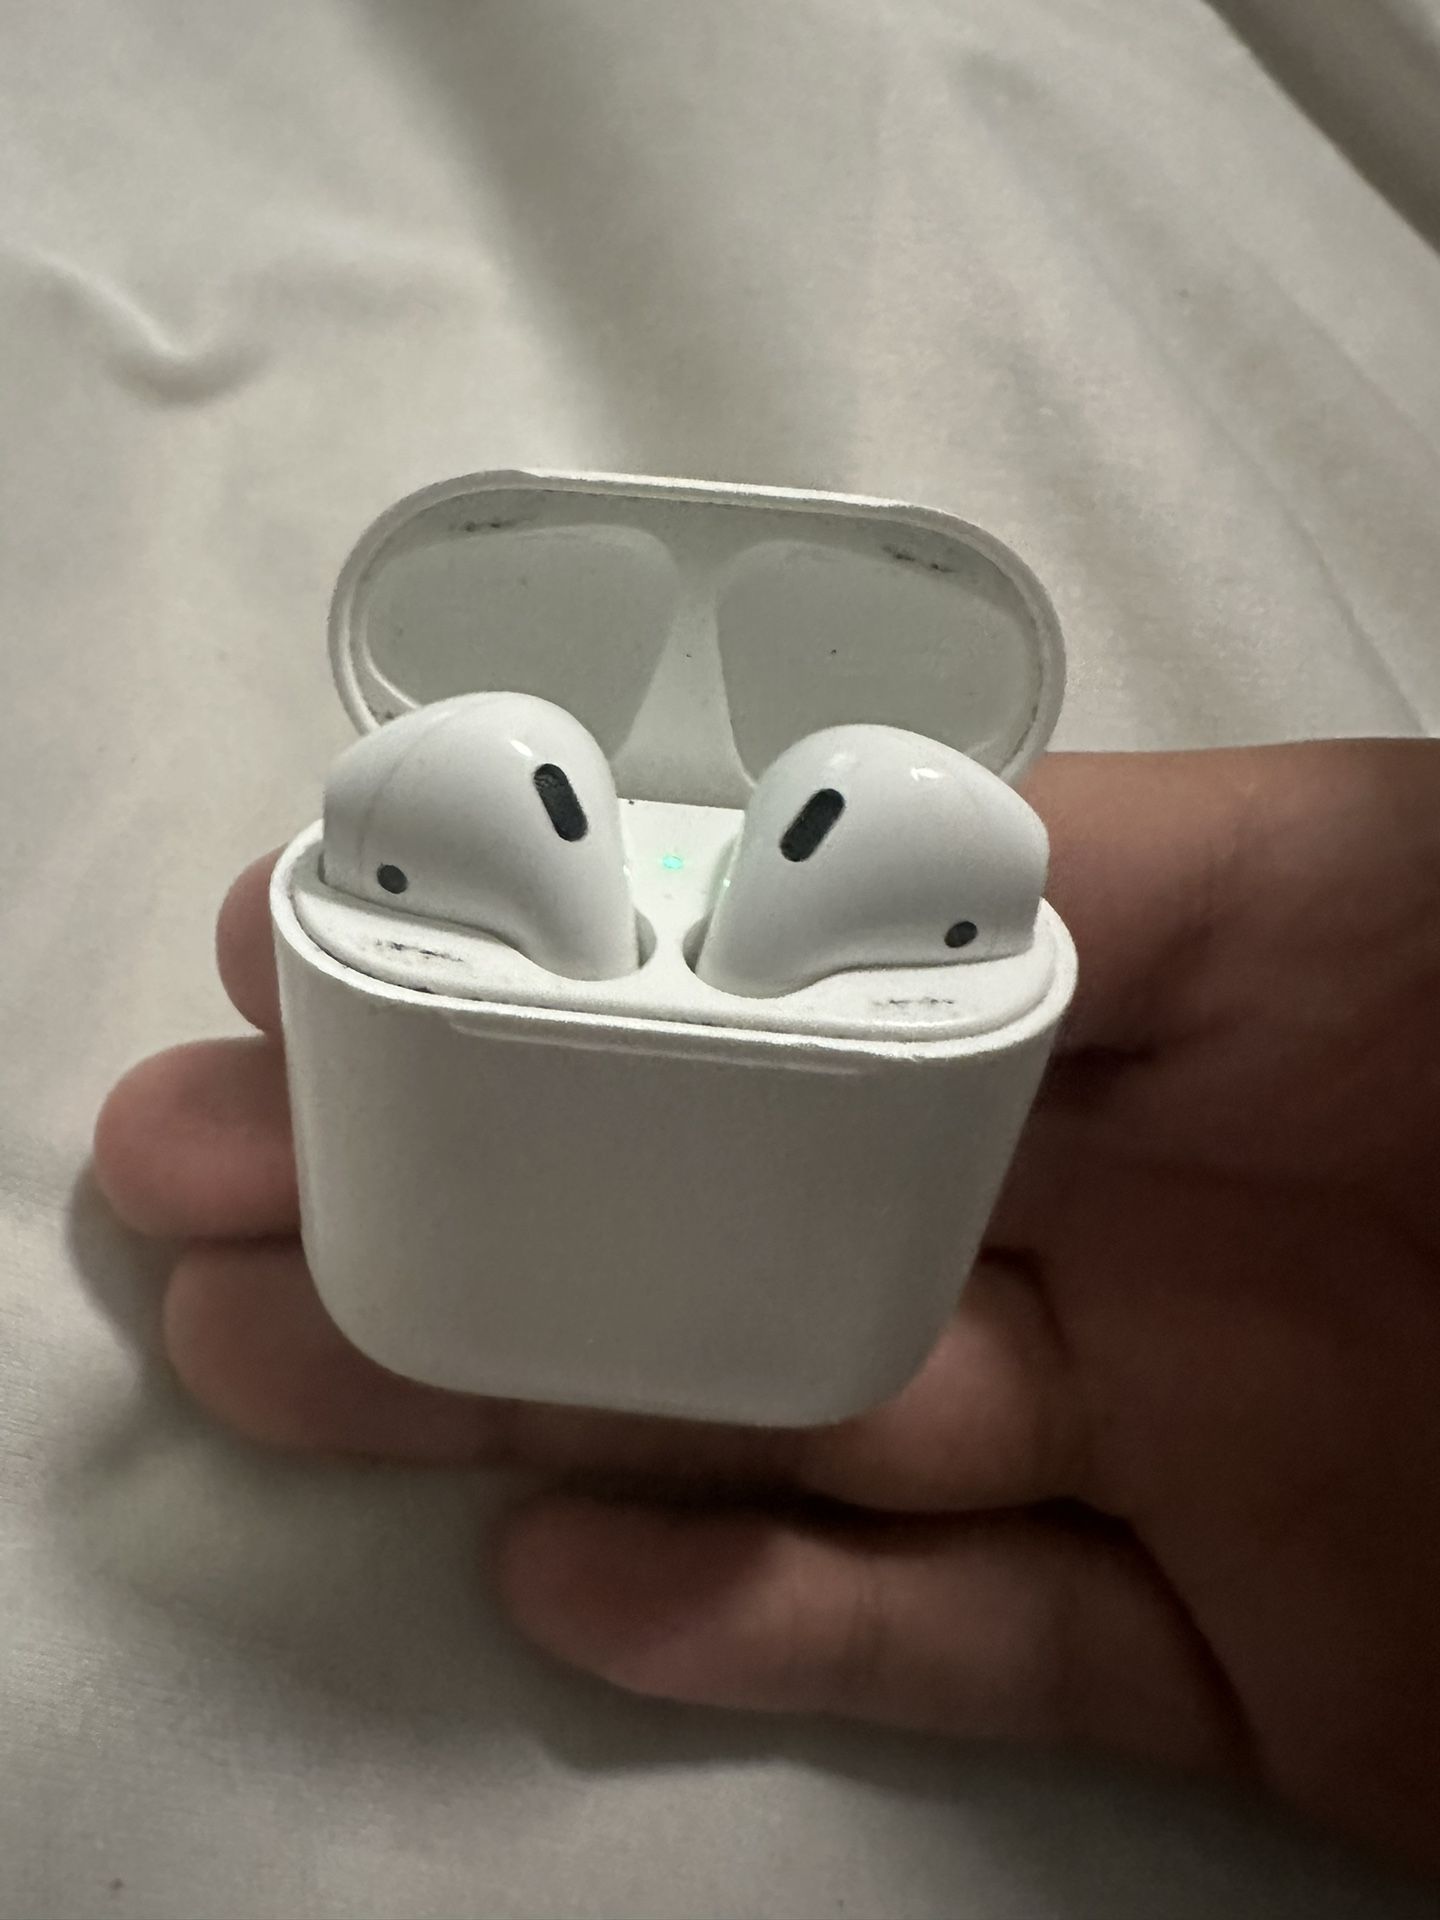 *USED* AirPods 